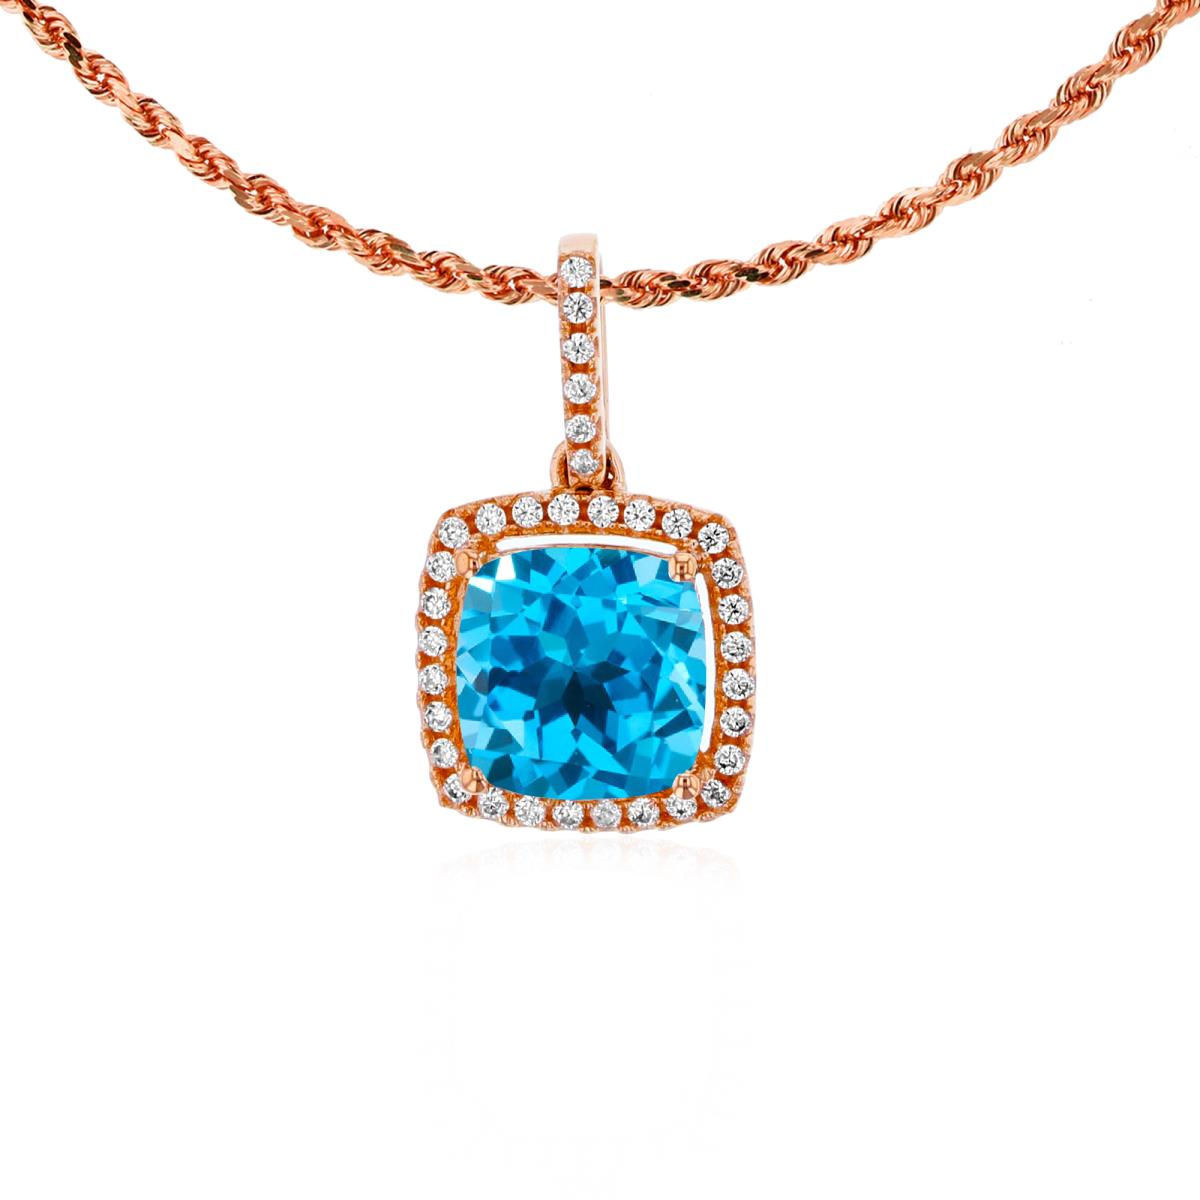 10K Rose Gold 7mm Cushion Swiss Blue Topaz & 0.14 CTTW Rnd Diamond Halo 18" Rope Chain Necklace